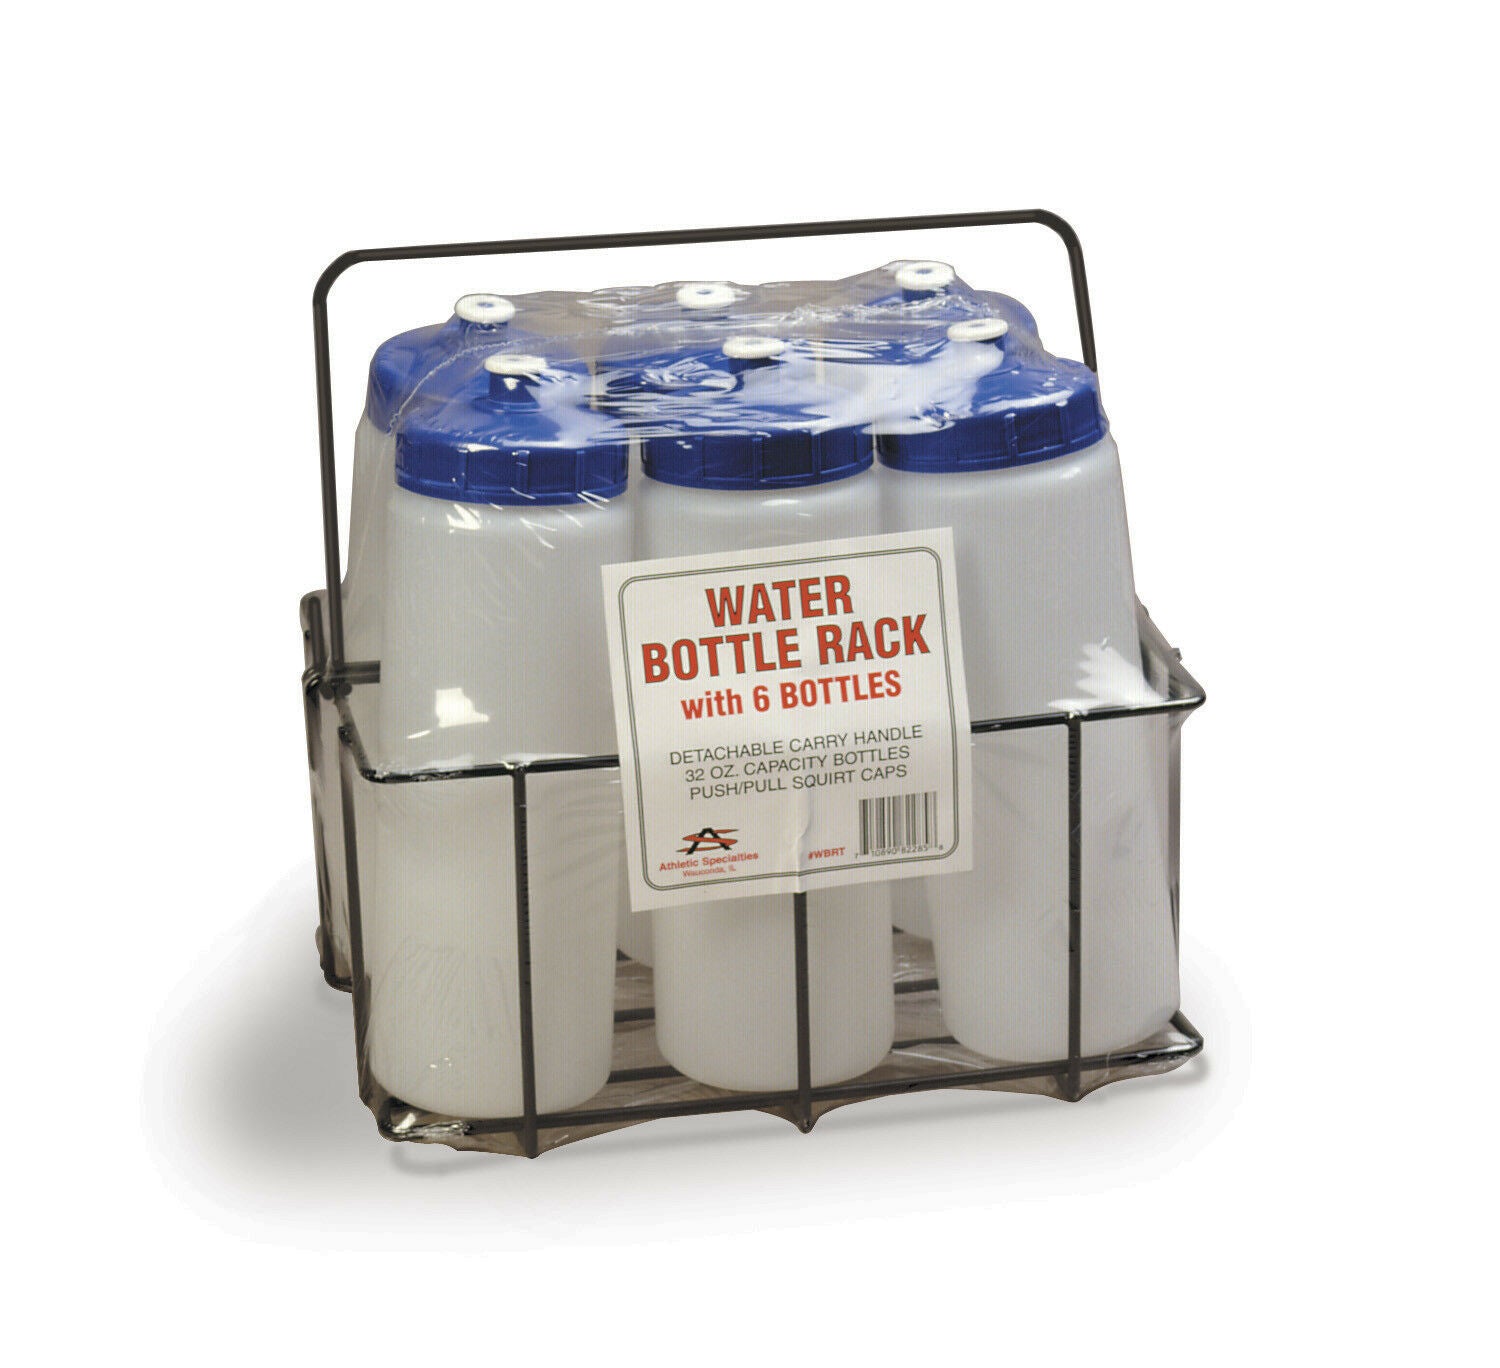 WBTR CARRYING RACK WITH SIX ONE QUART WATER BOTTLES